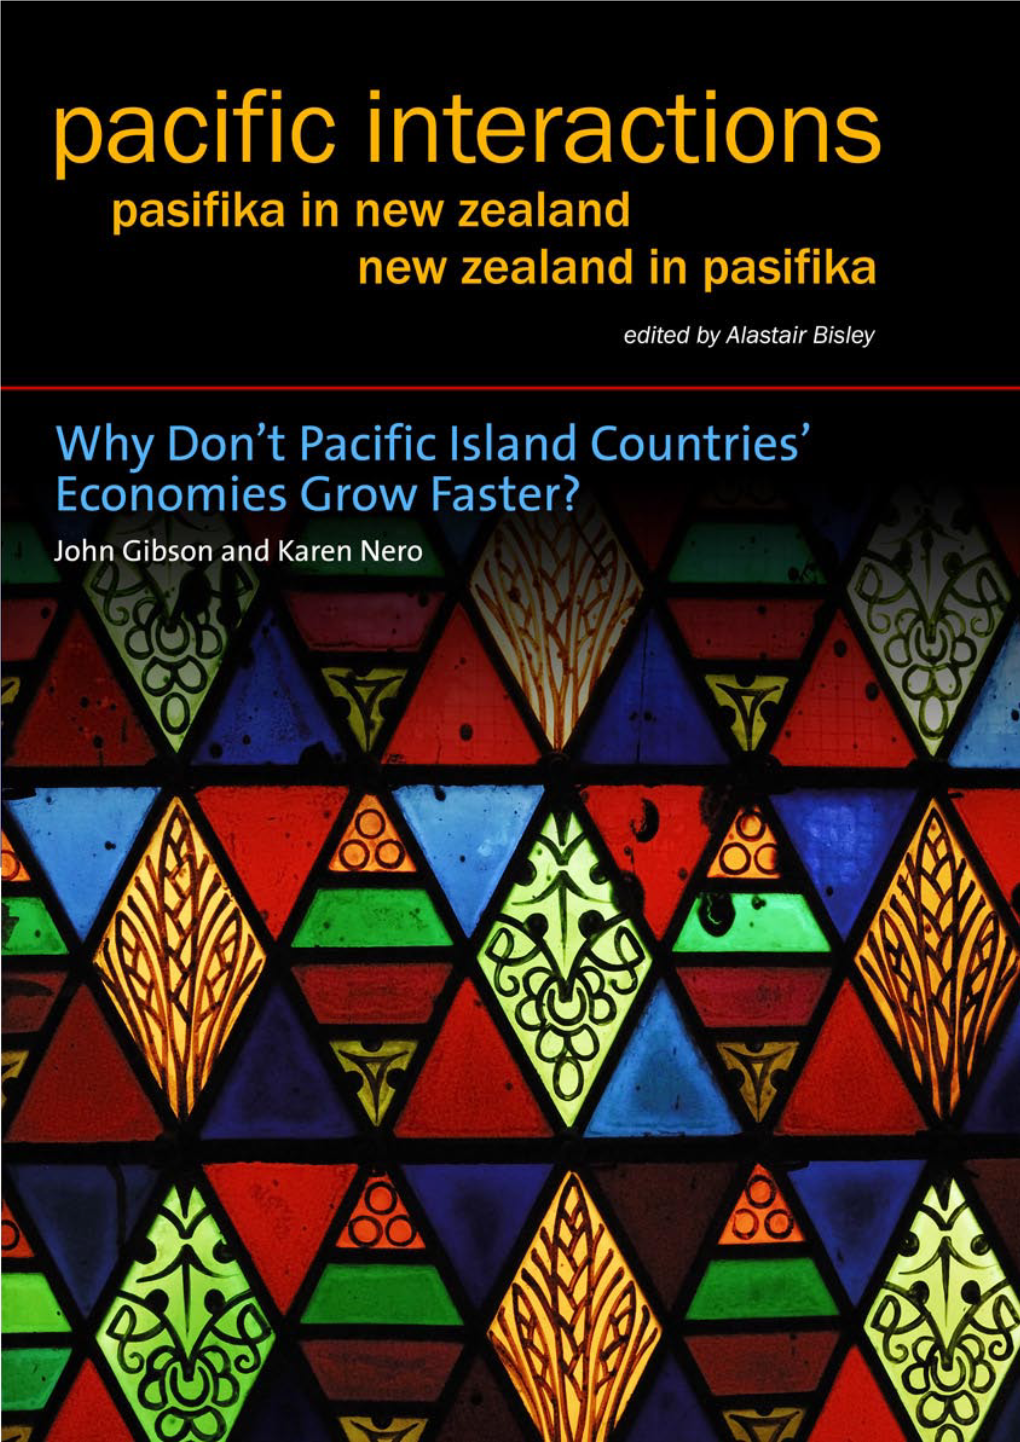 Why Don't Pacific Island Countries' Economies Grow Faster.Pdf